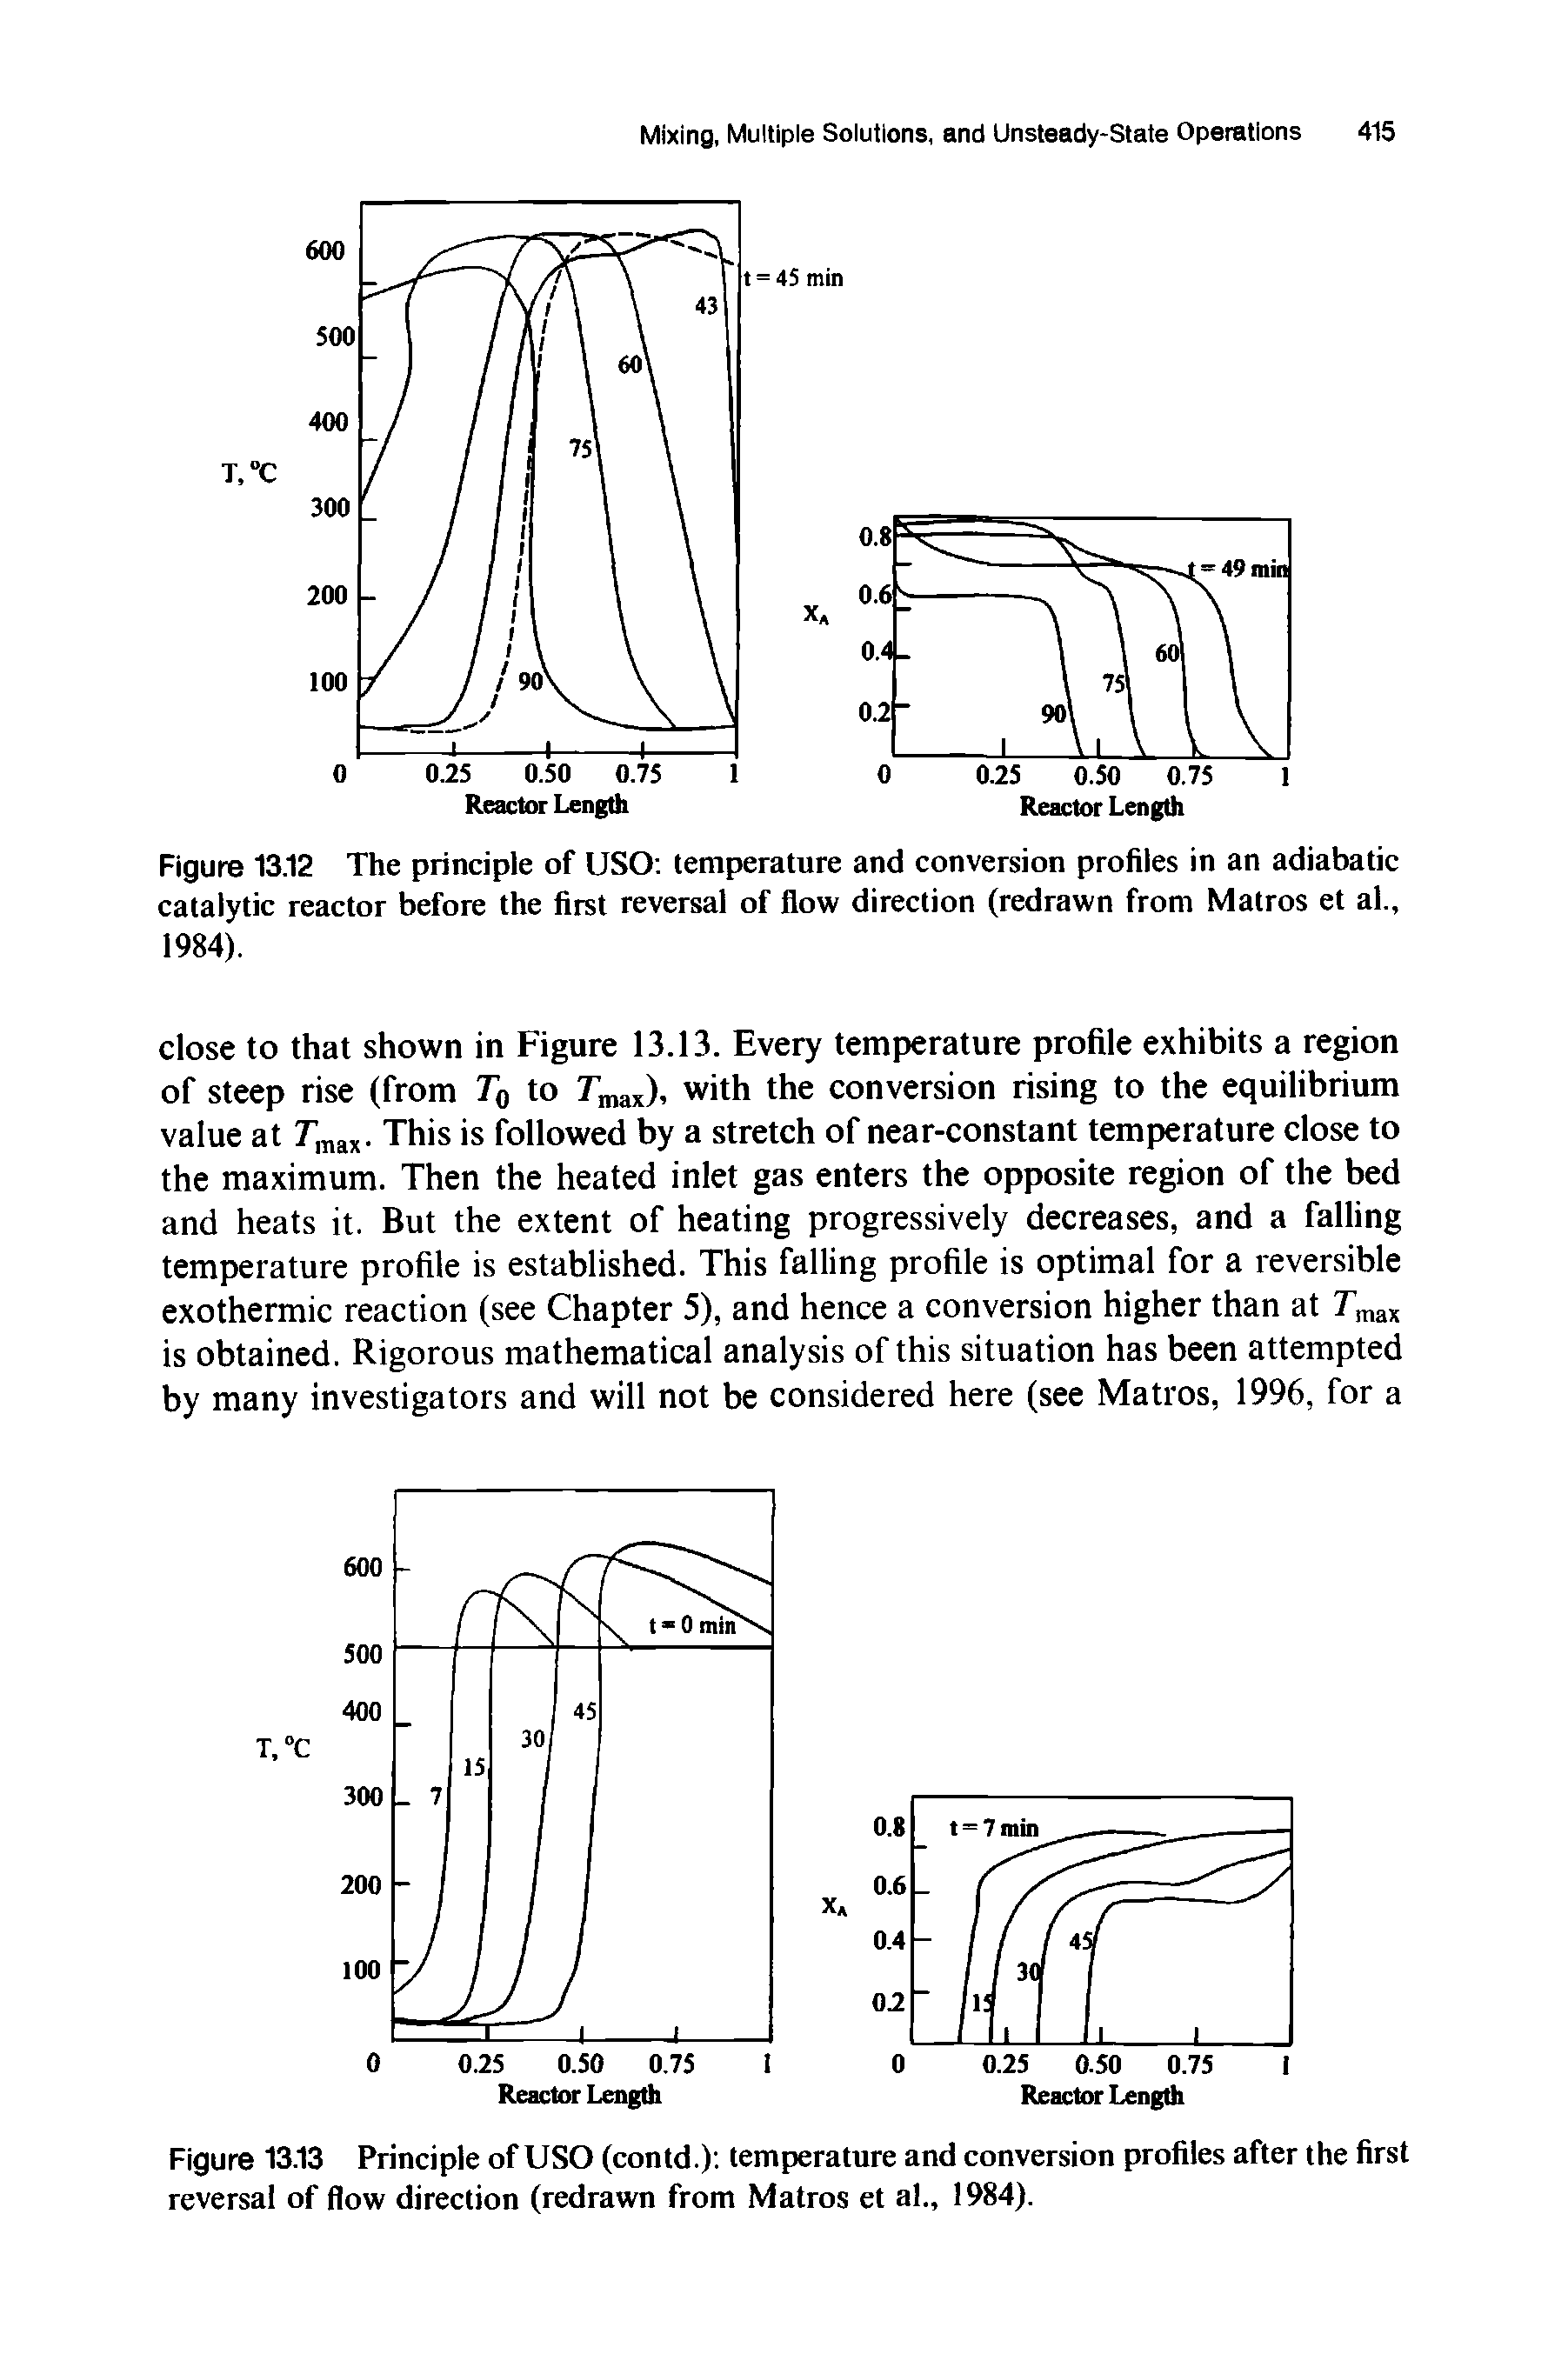 Figure 13.12 The principle of USO temperature and conversion profiles in an adiabatic catalytic reactor before the first reversal of flow direction (redrawn from Matros et al., 1984).